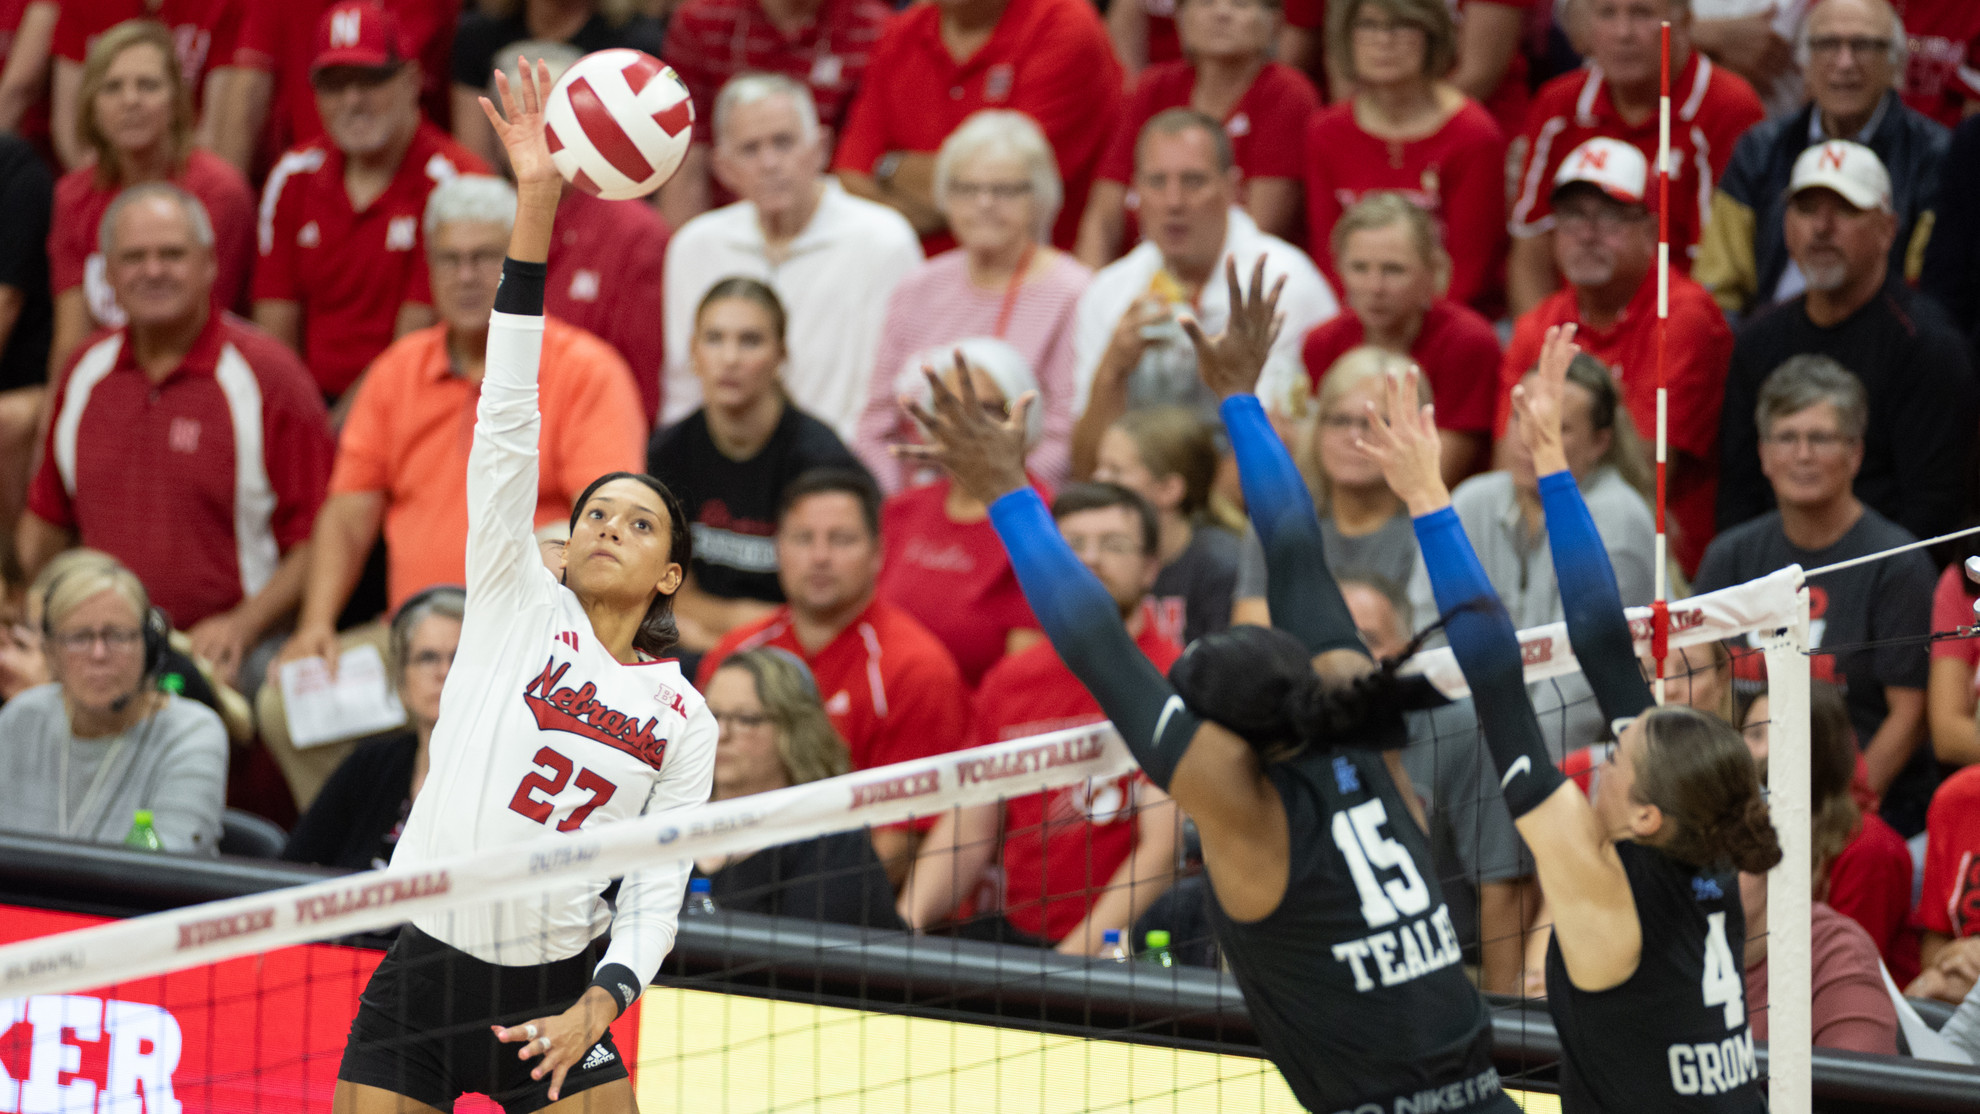 husker volleyball live